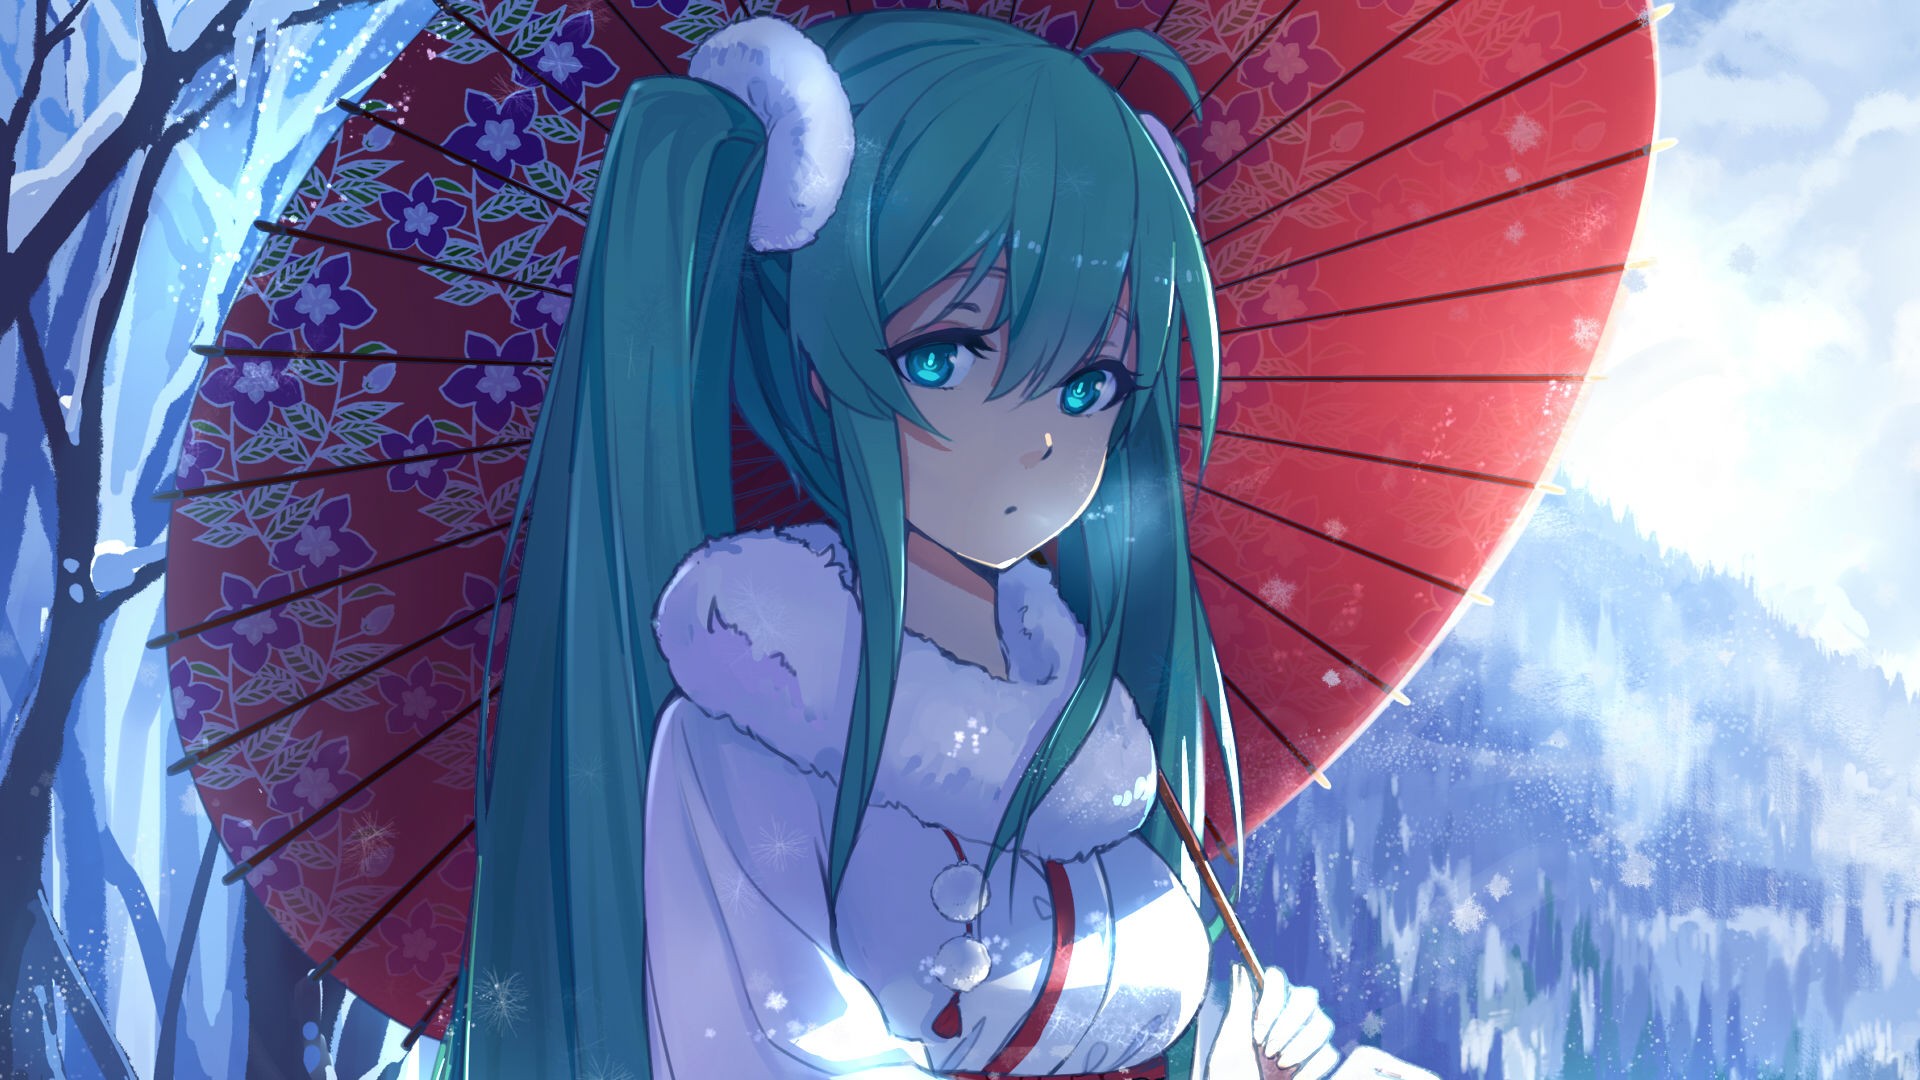 Anime 1920x1080 Hatsune Miku kimono twintails bangs green eyes teal hair Vocaloid anime girls Japanese umbrella long hair forest women with umbrella umbrella looking at viewer winter snow cold